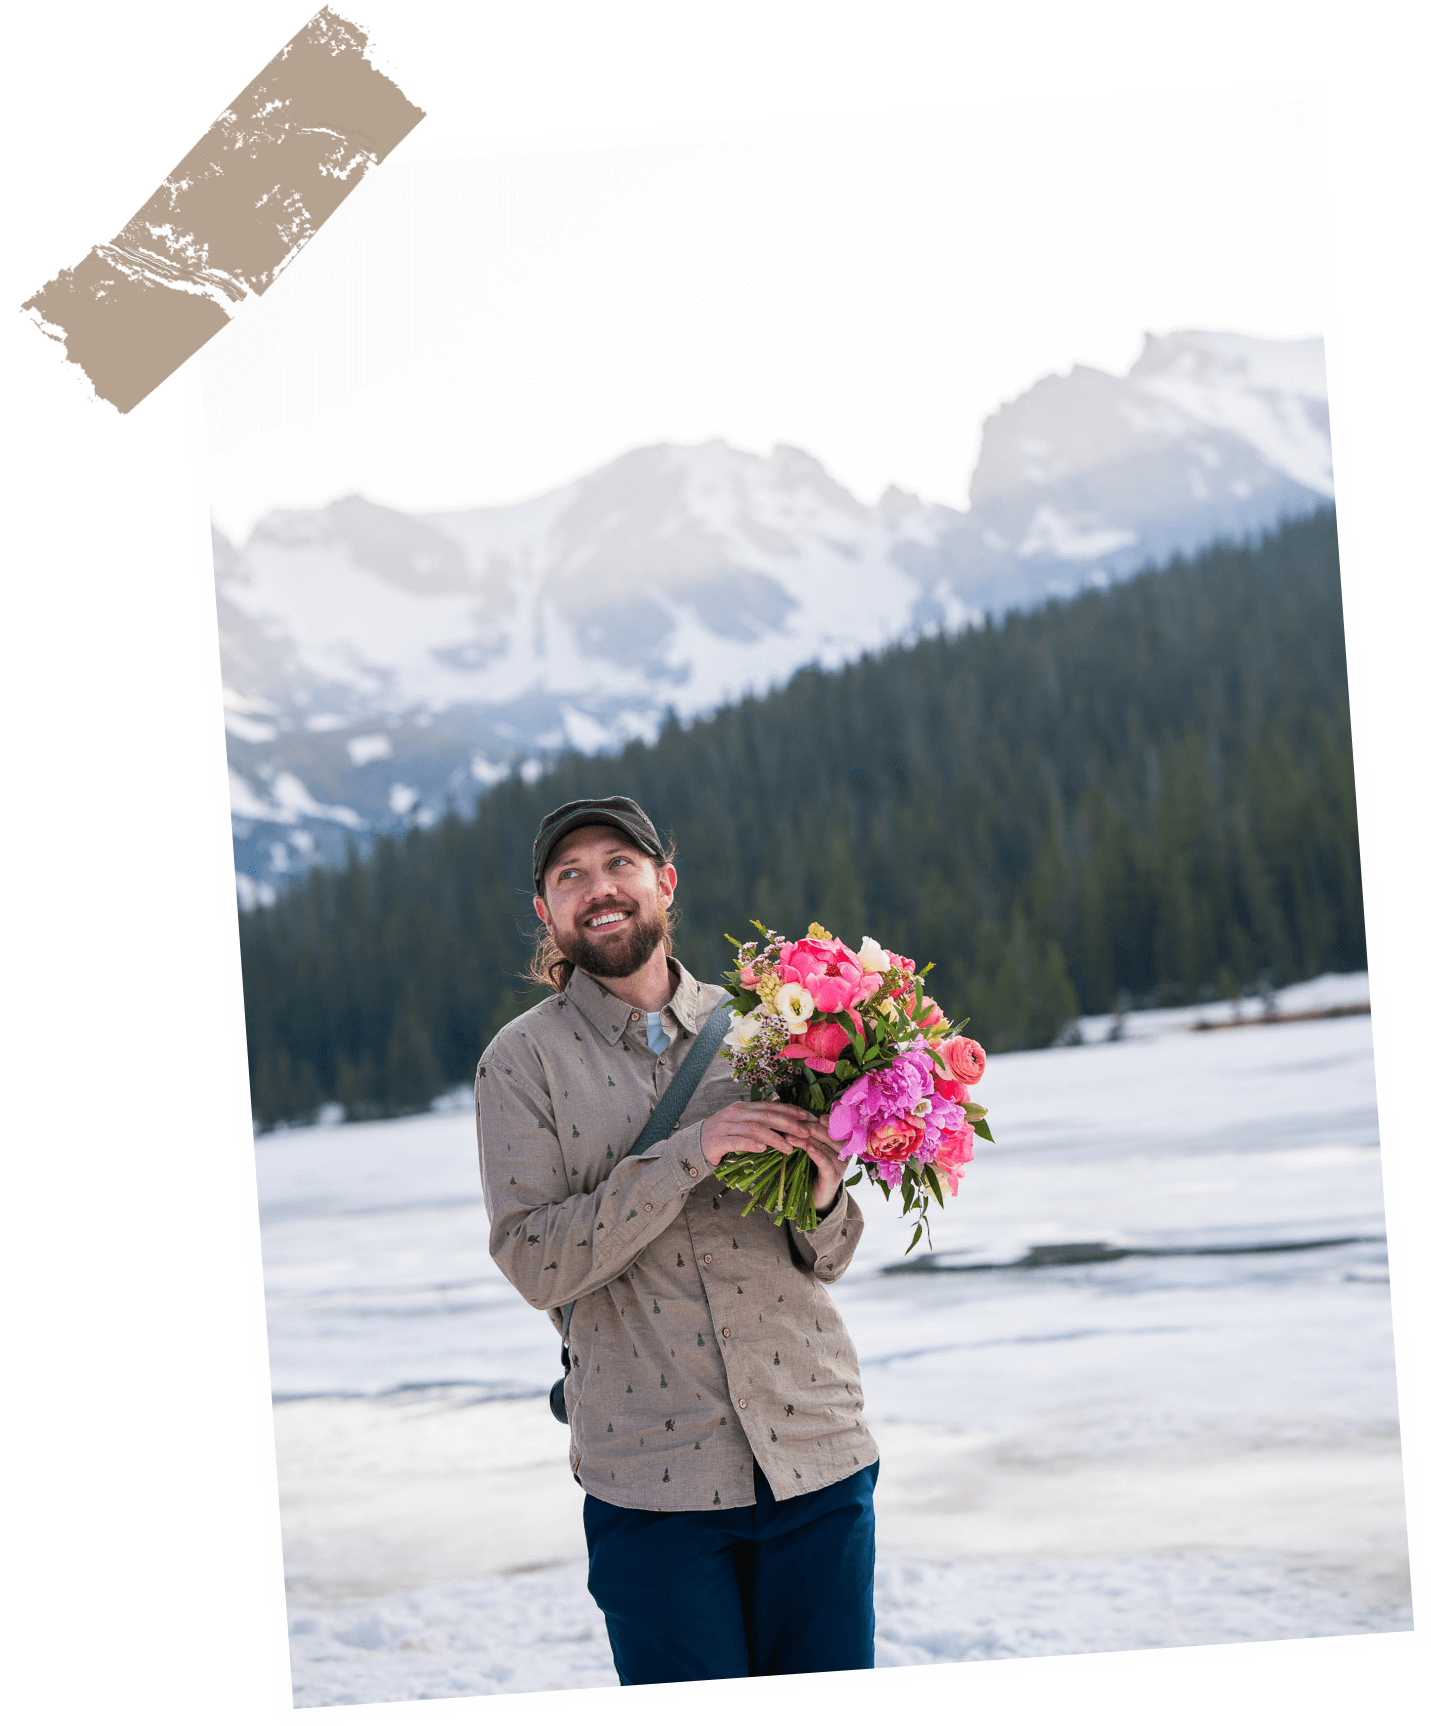 Kevin holding a bouquet of flowers with snowy Colorado mountains in the background.